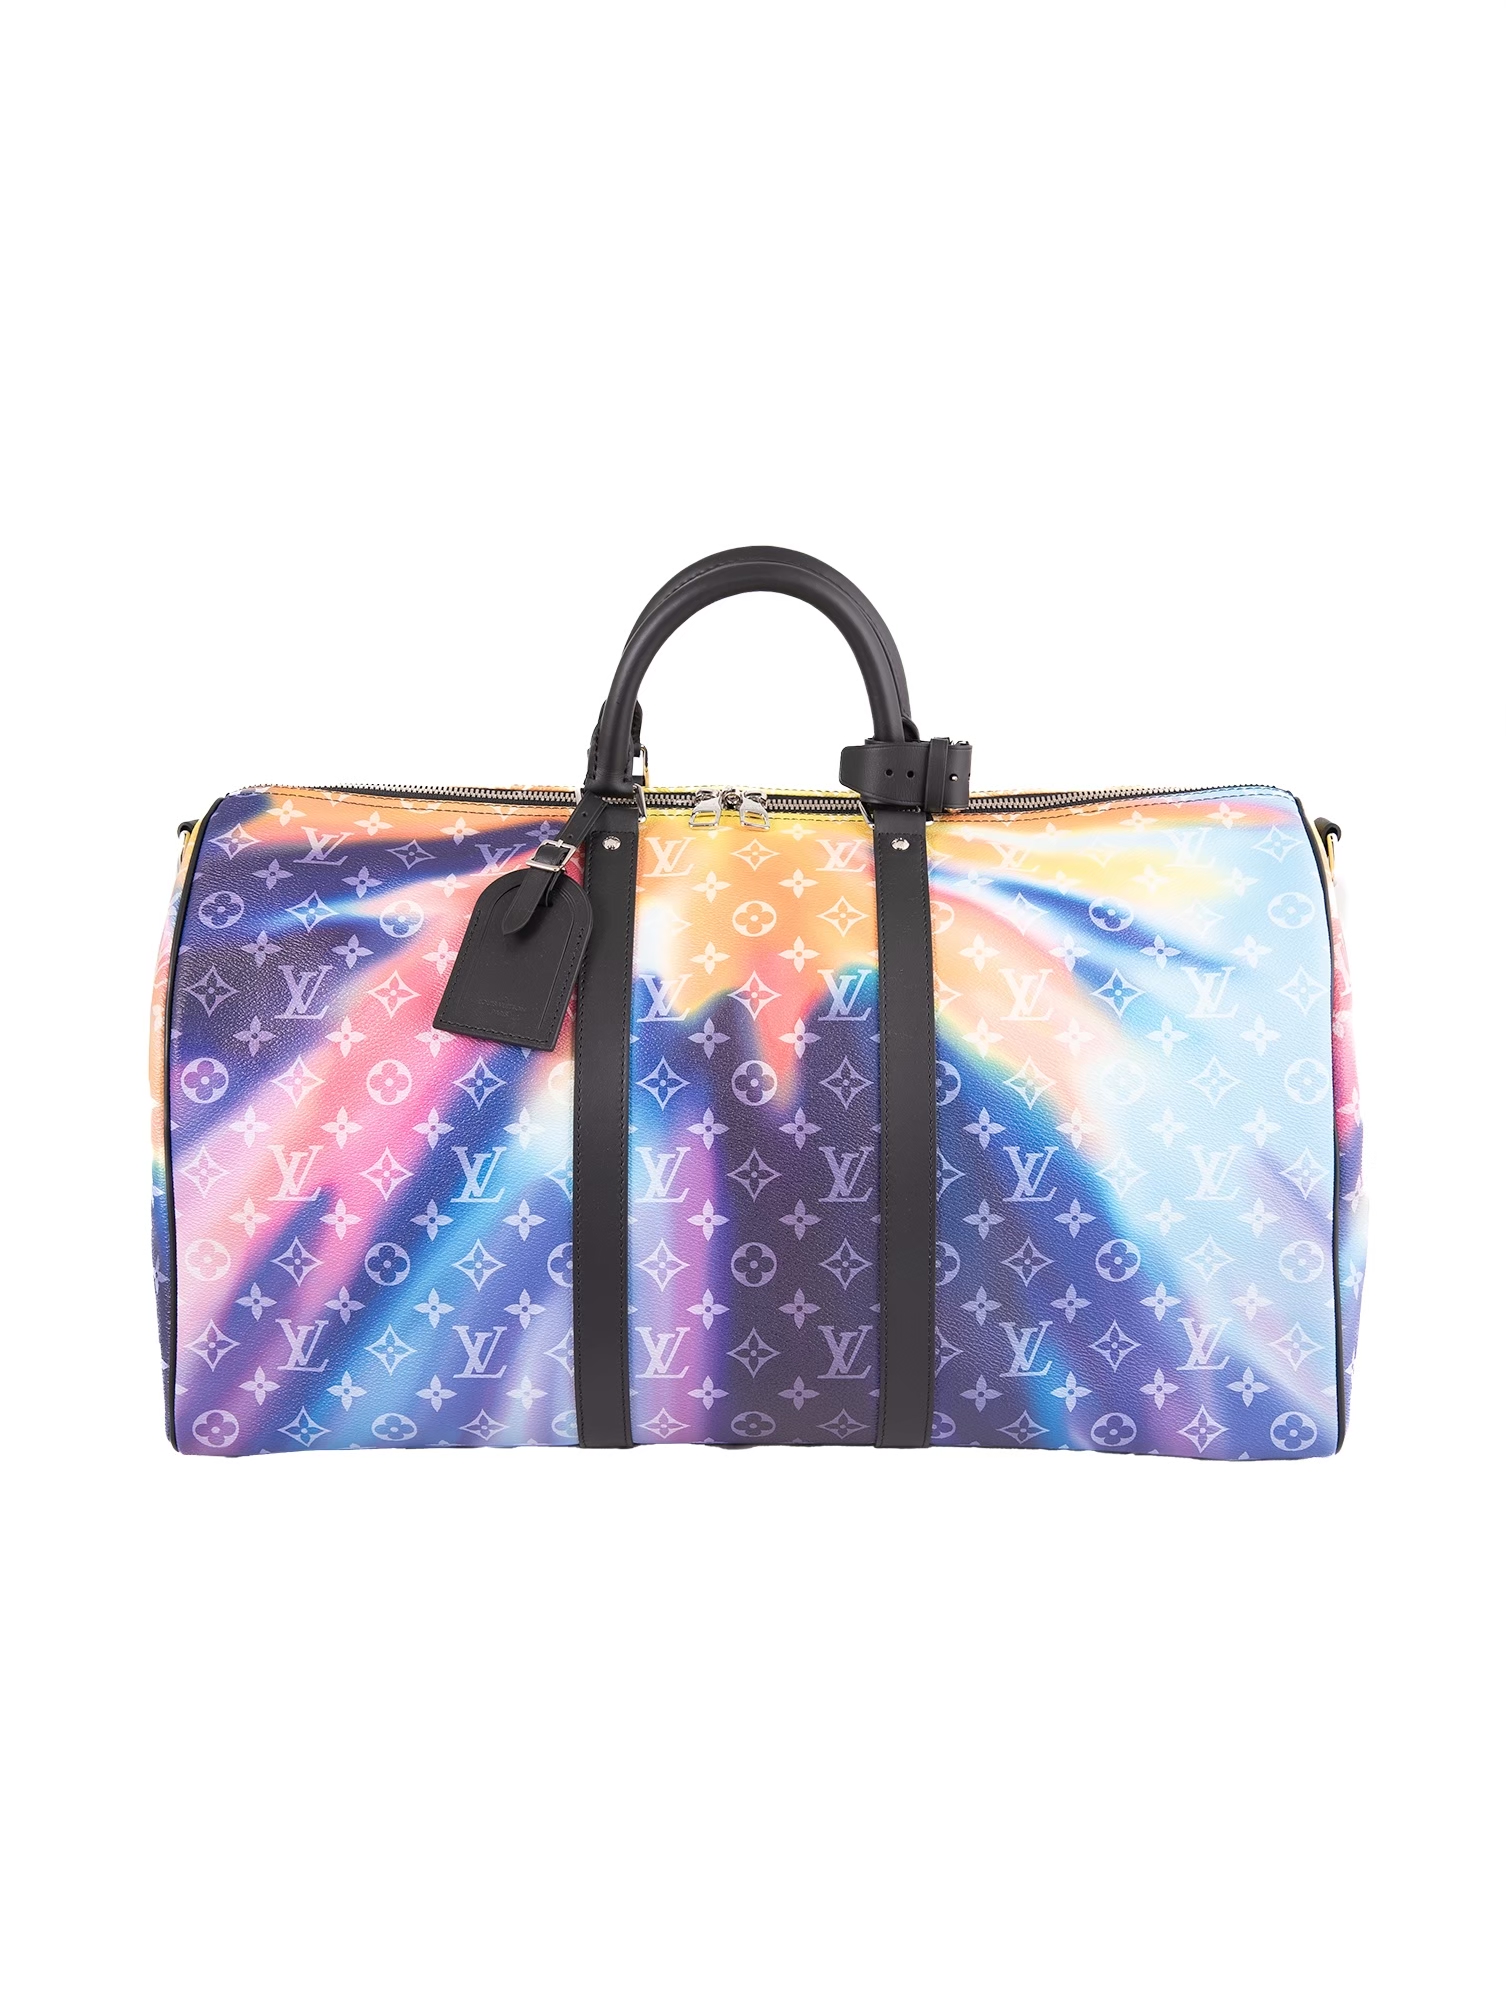 LOUIS VUITTON Keepall Bandouliere 50, 2021 Collection